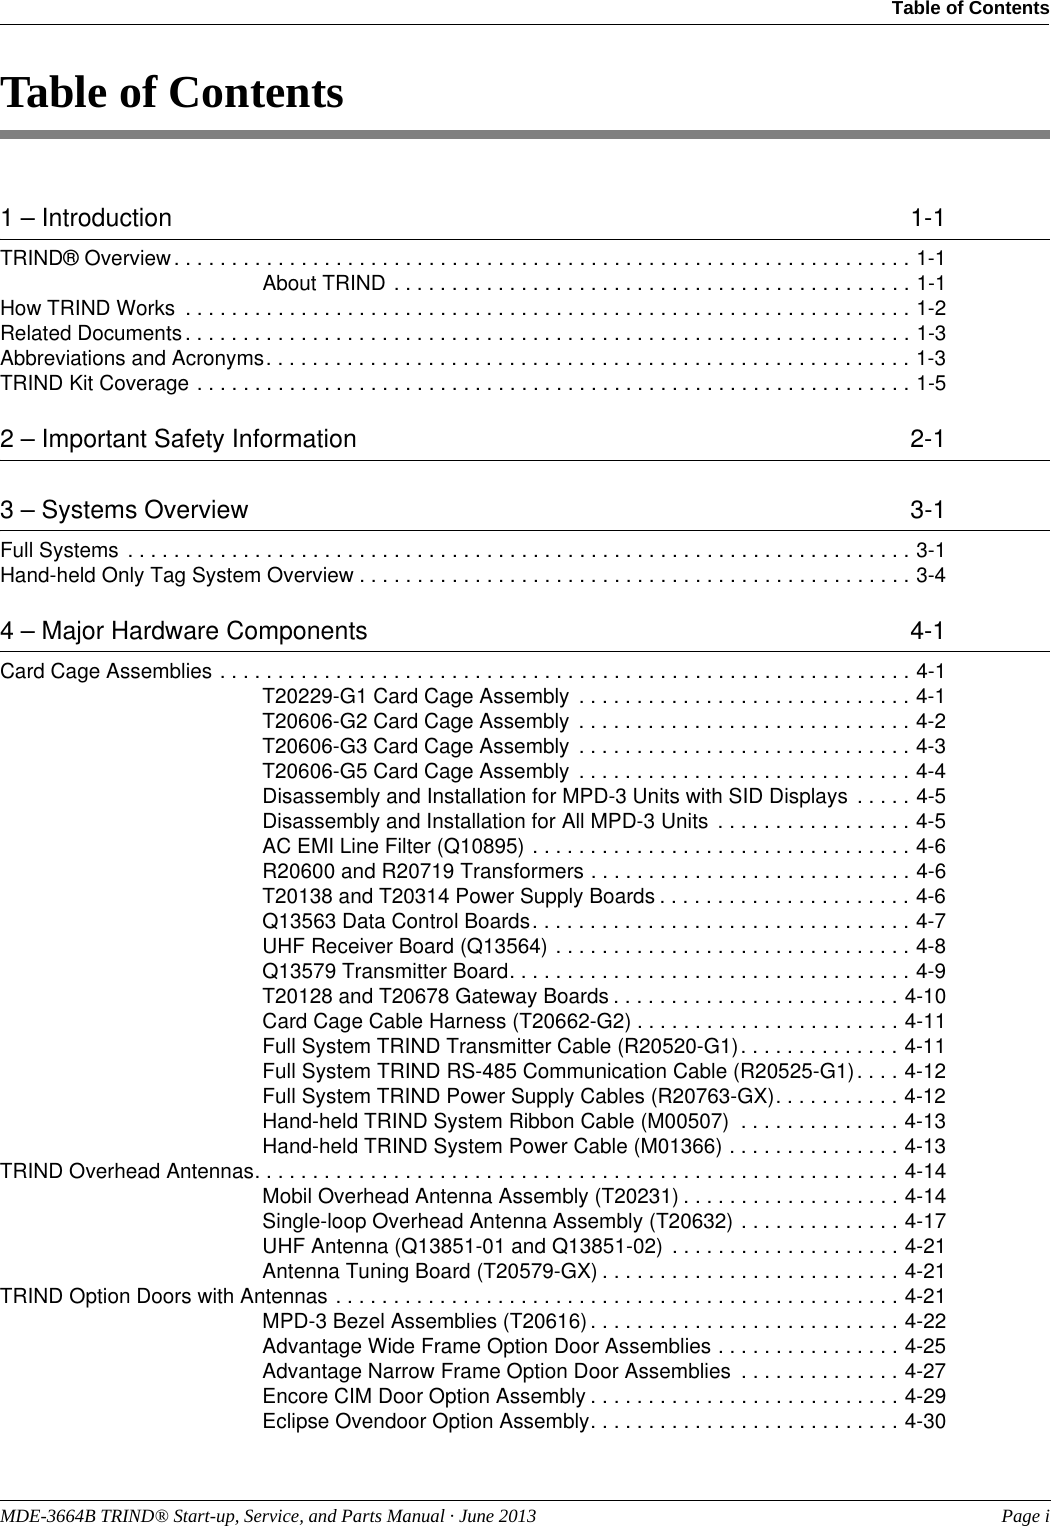 MDE-3664B TRIND® Start-up, Service, and Parts Manual · June 2013  Page iTable of Contents Table of Contents1 – Introduction  1-1TRIND® Overview. . . . . . . . . . . . . . . . . . . . . . . . . . . . . . . . . . . . . . . . . . . . . . . . . . . . . . . . . . . . . . . . 1-1About TRIND . . . . . . . . . . . . . . . . . . . . . . . . . . . . . . . . . . . . . . . . . . . . . 1-1How TRIND Works  . . . . . . . . . . . . . . . . . . . . . . . . . . . . . . . . . . . . . . . . . . . . . . . . . . . . . . . . . . . . . . . 1-2Related Documents. . . . . . . . . . . . . . . . . . . . . . . . . . . . . . . . . . . . . . . . . . . . . . . . . . . . . . . . . . . . . . . 1-3Abbreviations and Acronyms. . . . . . . . . . . . . . . . . . . . . . . . . . . . . . . . . . . . . . . . . . . . . . . . . . . . . . . . 1-3TRIND Kit Coverage . . . . . . . . . . . . . . . . . . . . . . . . . . . . . . . . . . . . . . . . . . . . . . . . . . . . . . . . . . . . . . 1-52 – Important Safety Information  2-13 – Systems Overview  3-1Full Systems . . . . . . . . . . . . . . . . . . . . . . . . . . . . . . . . . . . . . . . . . . . . . . . . . . . . . . . . . . . . . . . . . . . . 3-1Hand-held Only Tag System Overview . . . . . . . . . . . . . . . . . . . . . . . . . . . . . . . . . . . . . . . . . . . . . . . . 3-44 – Major Hardware Components  4-1Card Cage Assemblies . . . . . . . . . . . . . . . . . . . . . . . . . . . . . . . . . . . . . . . . . . . . . . . . . . . . . . . . . . . . 4-1T20229-G1 Card Cage Assembly  . . . . . . . . . . . . . . . . . . . . . . . . . . . . . 4-1T20606-G2 Card Cage Assembly  . . . . . . . . . . . . . . . . . . . . . . . . . . . . . 4-2T20606-G3 Card Cage Assembly  . . . . . . . . . . . . . . . . . . . . . . . . . . . . . 4-3T20606-G5 Card Cage Assembly  . . . . . . . . . . . . . . . . . . . . . . . . . . . . . 4-4Disassembly and Installation for MPD-3 Units with SID Displays  . . . . . 4-5Disassembly and Installation for All MPD-3 Units  . . . . . . . . . . . . . . . . . 4-5AC EMI Line Filter (Q10895) . . . . . . . . . . . . . . . . . . . . . . . . . . . . . . . . . 4-6R20600 and R20719 Transformers . . . . . . . . . . . . . . . . . . . . . . . . . . . . 4-6T20138 and T20314 Power Supply Boards . . . . . . . . . . . . . . . . . . . . . . 4-6Q13563 Data Control Boards. . . . . . . . . . . . . . . . . . . . . . . . . . . . . . . . . 4-7UHF Receiver Board (Q13564) . . . . . . . . . . . . . . . . . . . . . . . . . . . . . . . 4-8Q13579 Transmitter Board. . . . . . . . . . . . . . . . . . . . . . . . . . . . . . . . . . . 4-9T20128 and T20678 Gateway Boards . . . . . . . . . . . . . . . . . . . . . . . . . 4-10Card Cage Cable Harness (T20662-G2) . . . . . . . . . . . . . . . . . . . . . . . 4-11Full System TRIND Transmitter Cable (R20520-G1). . . . . . . . . . . . . . 4-11Full System TRIND RS-485 Communication Cable (R20525-G1). . . . 4-12Full System TRIND Power Supply Cables (R20763-GX). . . . . . . . . . . 4-12Hand-held TRIND System Ribbon Cable (M00507)  . . . . . . . . . . . . . . 4-13Hand-held TRIND System Power Cable (M01366) . . . . . . . . . . . . . . . 4-13TRIND Overhead Antennas. . . . . . . . . . . . . . . . . . . . . . . . . . . . . . . . . . . . . . . . . . . . . . . . . . . . . . . . 4-14Mobil Overhead Antenna Assembly (T20231) . . . . . . . . . . . . . . . . . . . 4-14Single-loop Overhead Antenna Assembly (T20632) . . . . . . . . . . . . . . 4-17UHF Antenna (Q13851-01 and Q13851-02)  . . . . . . . . . . . . . . . . . . . . 4-21Antenna Tuning Board (T20579-GX) . . . . . . . . . . . . . . . . . . . . . . . . . . 4-21TRIND Option Doors with Antennas . . . . . . . . . . . . . . . . . . . . . . . . . . . . . . . . . . . . . . . . . . . . . . . . . 4-21MPD-3 Bezel Assemblies (T20616) . . . . . . . . . . . . . . . . . . . . . . . . . . . 4-22Advantage Wide Frame Option Door Assemblies . . . . . . . . . . . . . . . . 4-25Advantage Narrow Frame Option Door Assemblies  . . . . . . . . . . . . . . 4-27Encore CIM Door Option Assembly . . . . . . . . . . . . . . . . . . . . . . . . . . . 4-29Eclipse Ovendoor Option Assembly. . . . . . . . . . . . . . . . . . . . . . . . . . . 4-30